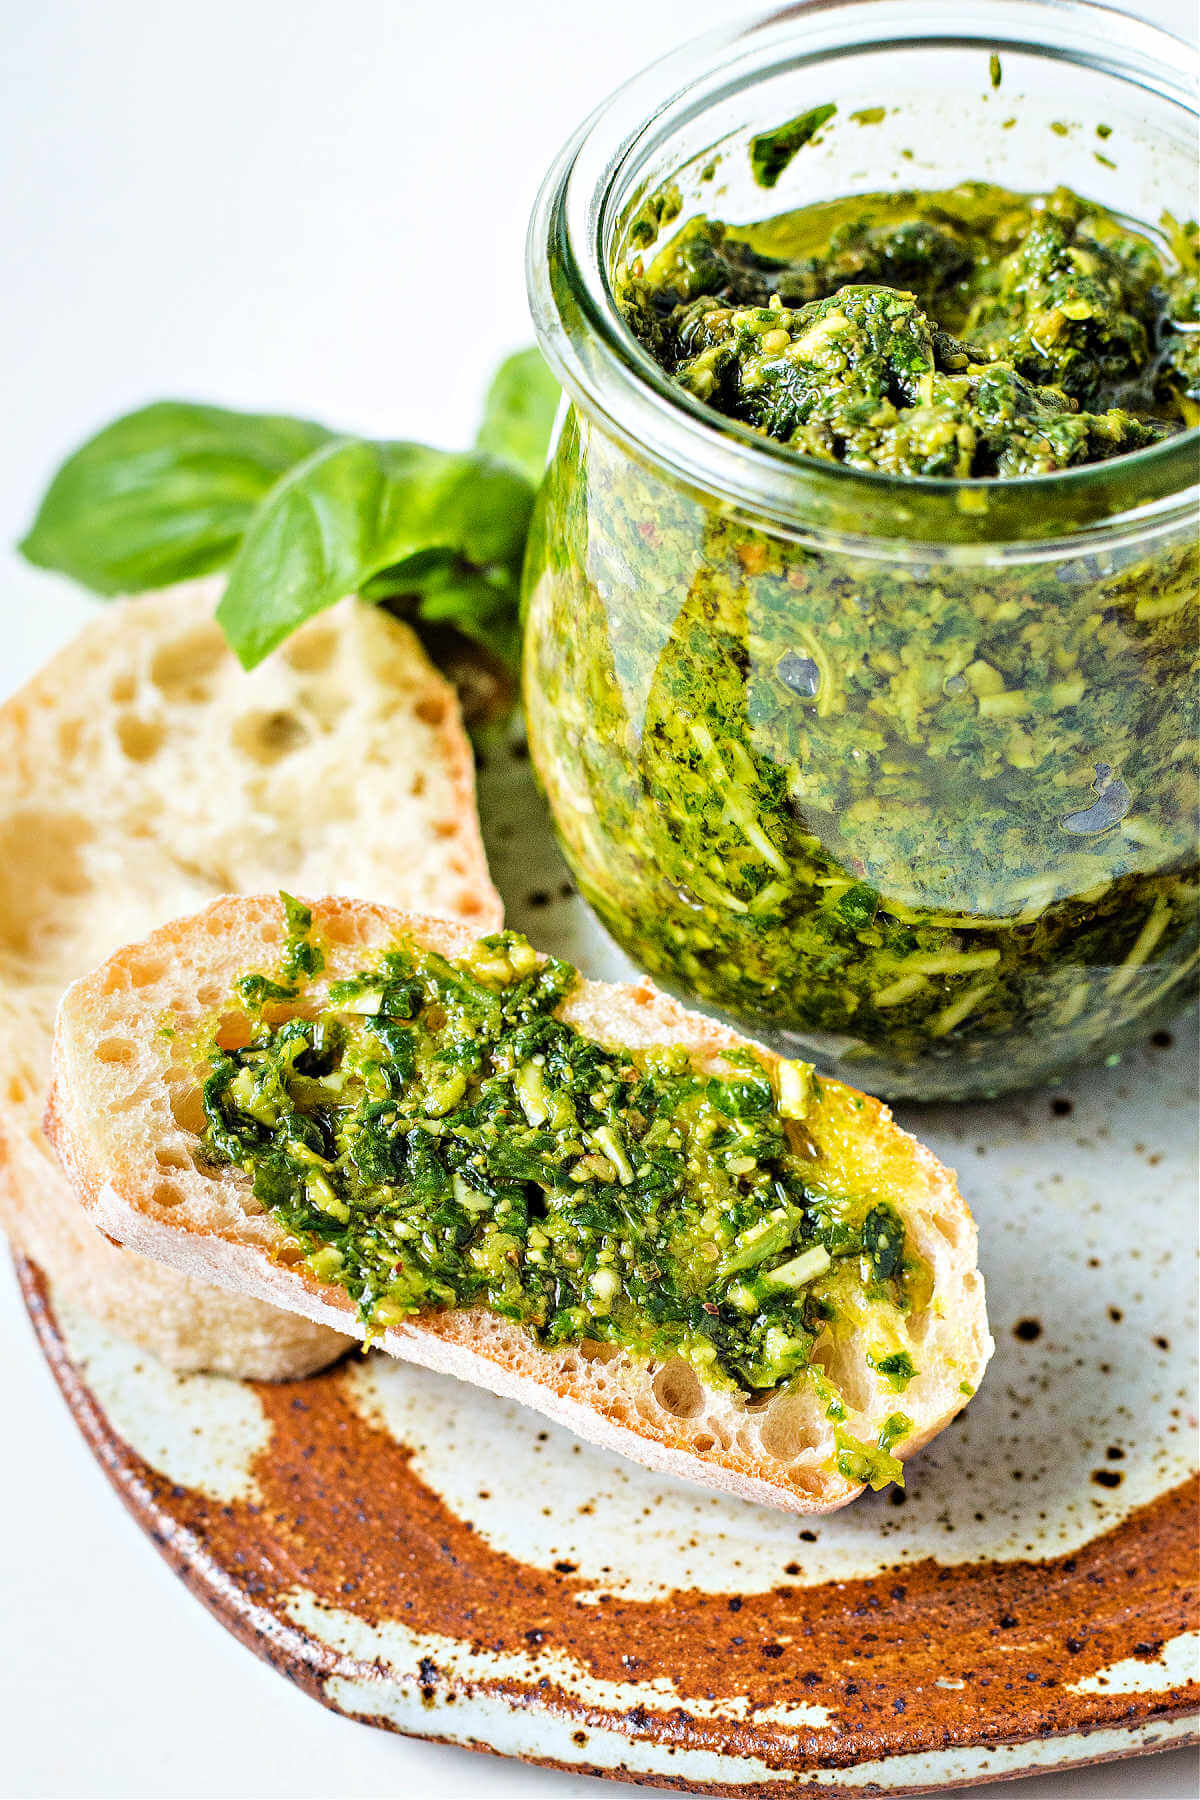 a slice of baguette with pesto spread on top sitting on a plate with a jar of pesto.